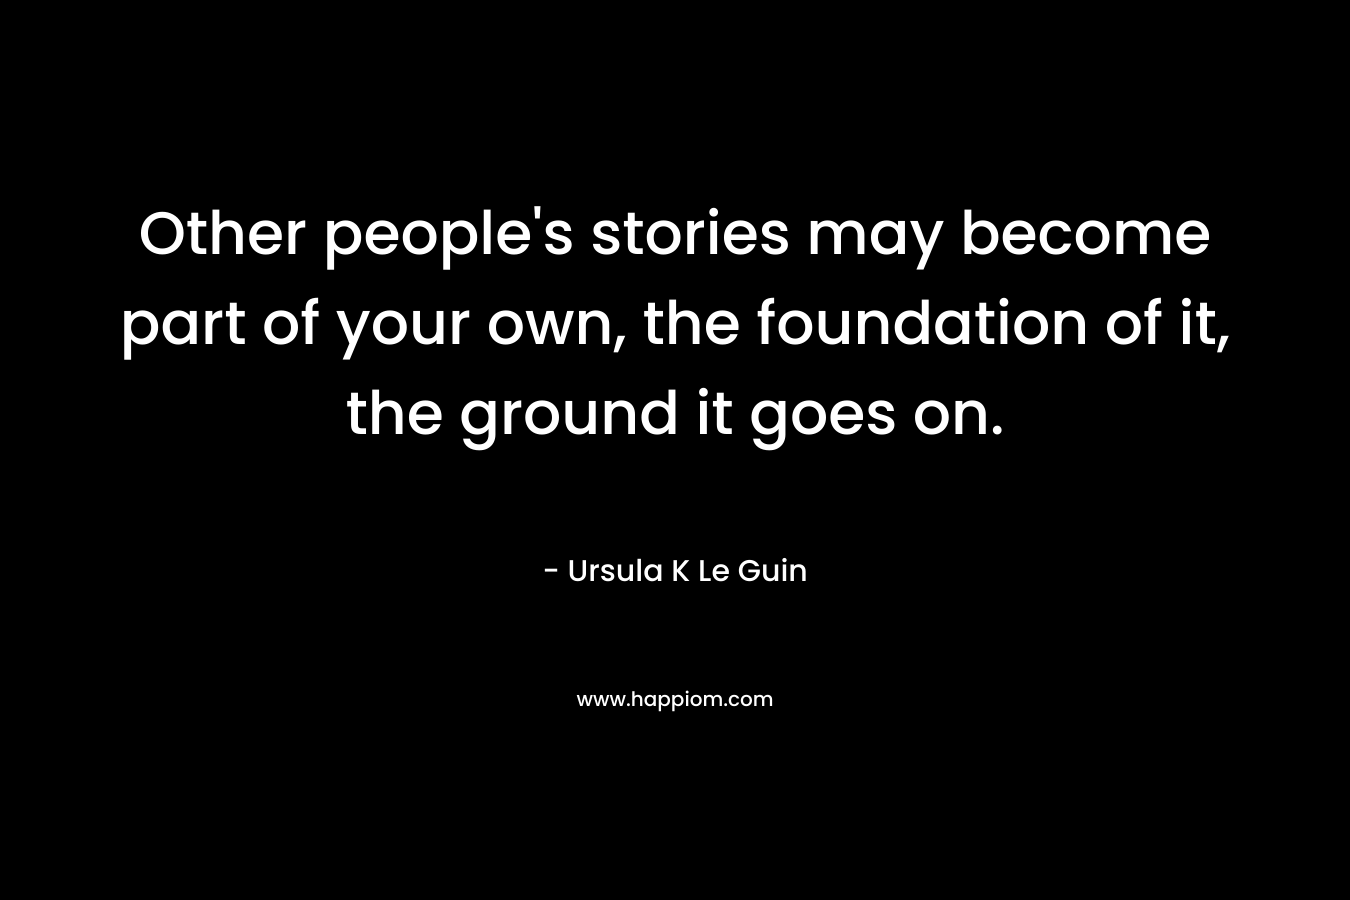 Other people's stories may become part of your own, the foundation of it, the ground it goes on.